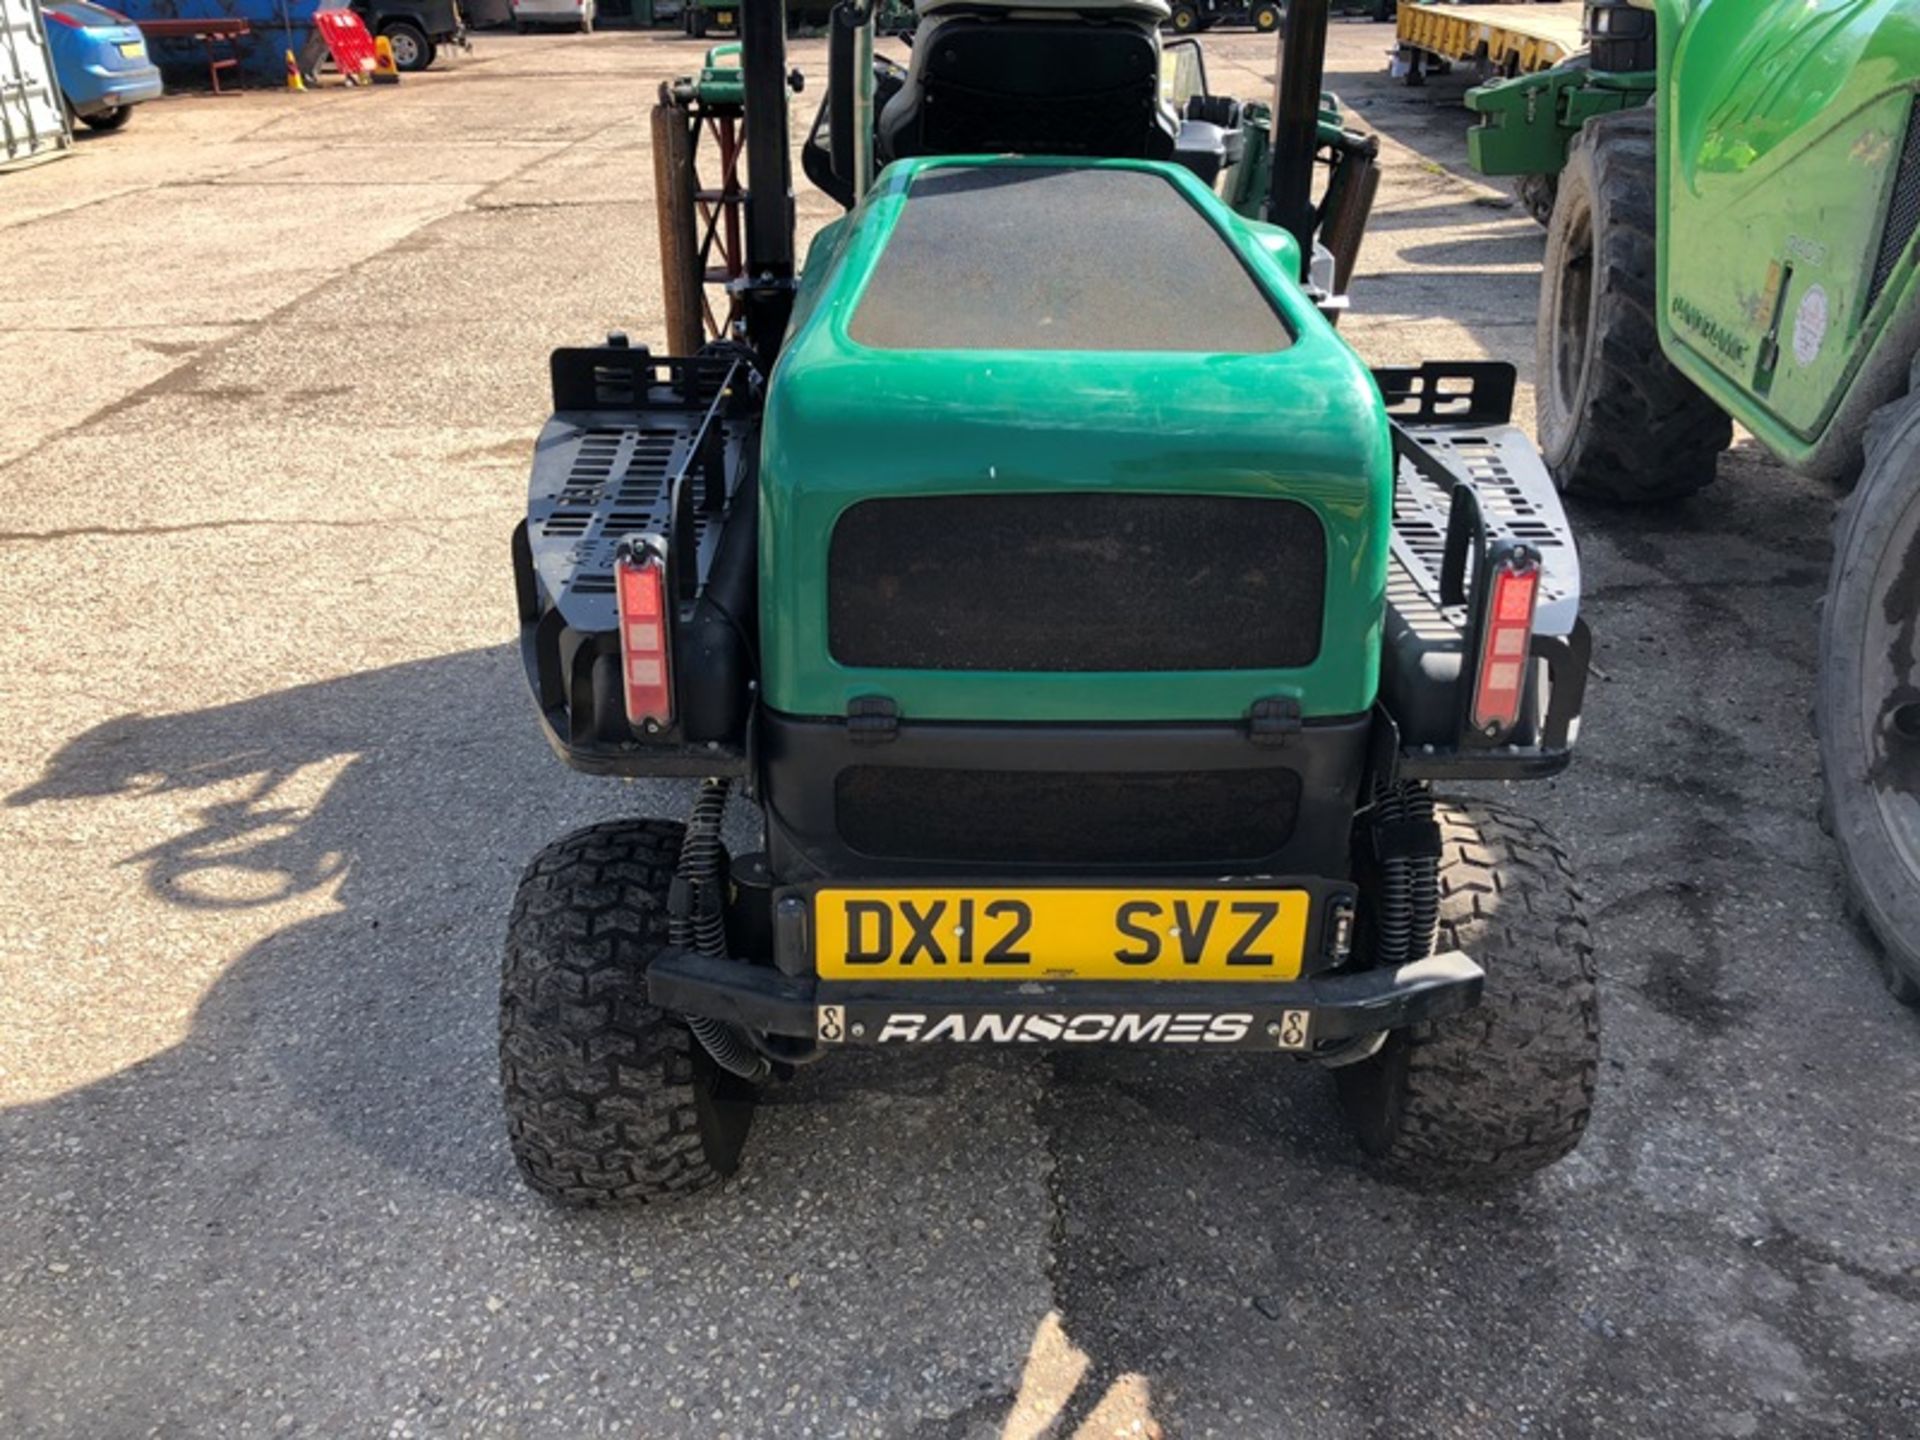 Ransomes Parkway 3 ride on mower Registration No. DX12 SVZ Hours: 592 (service required - Image 2 of 8